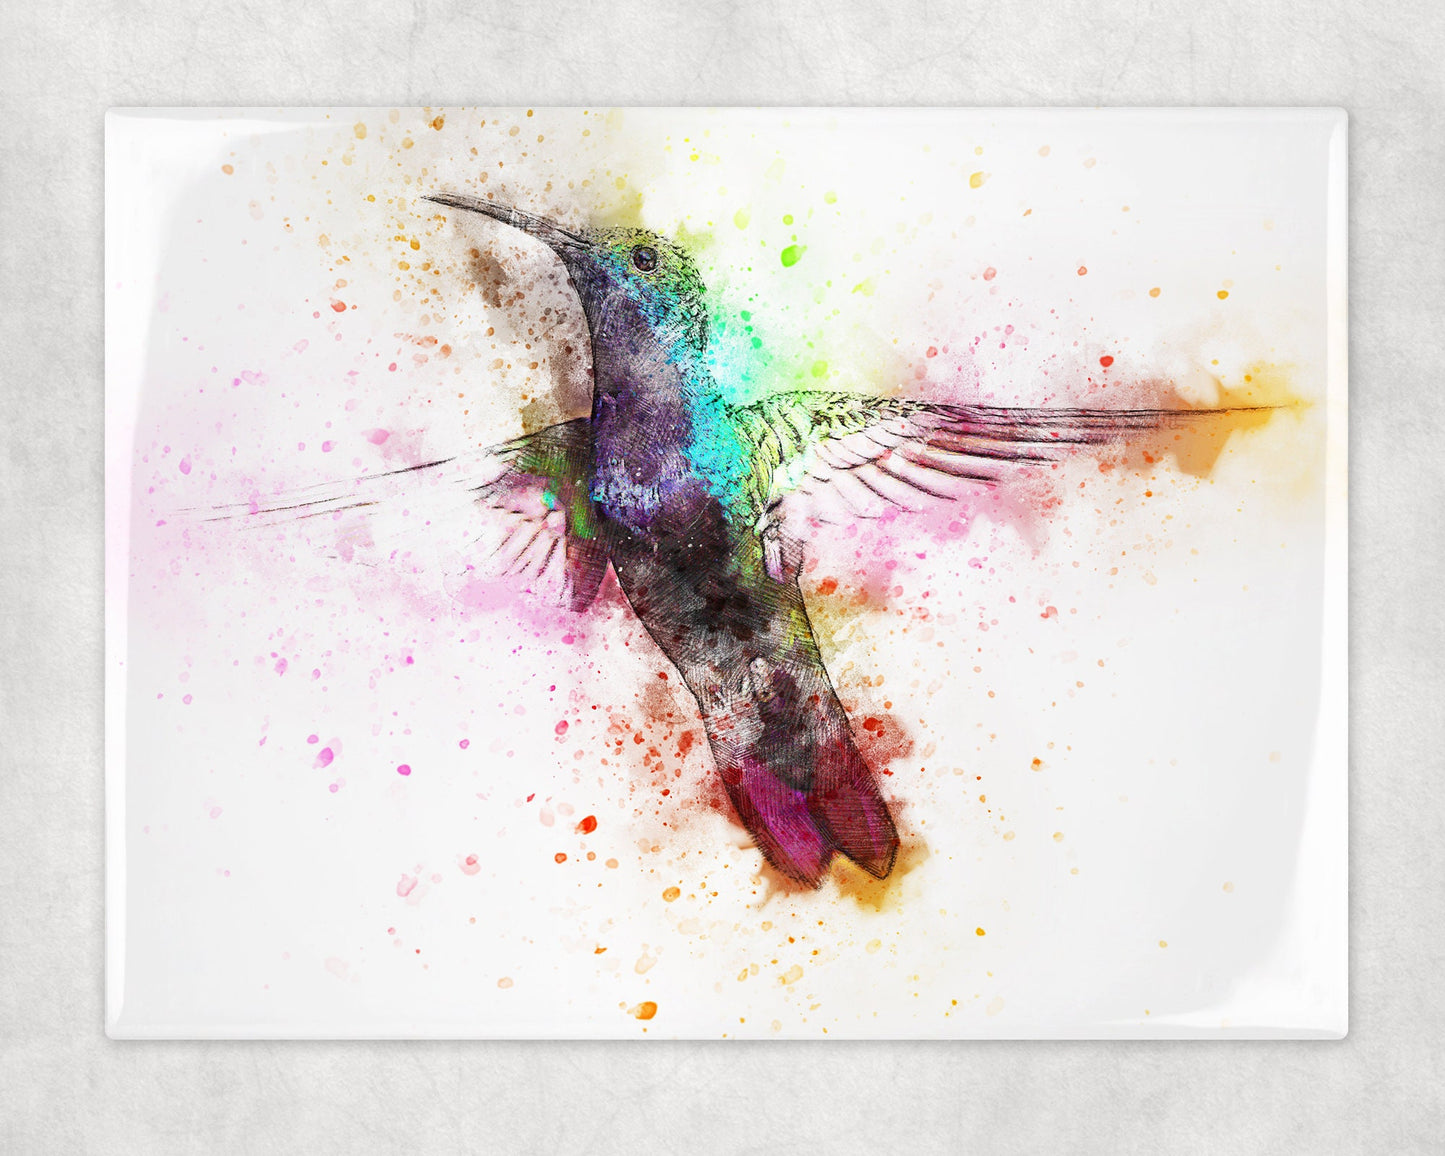 Watercolor Style Hummingbird Art Decorative Ceramic Tile with Optional Easel Back - 6x8 inches